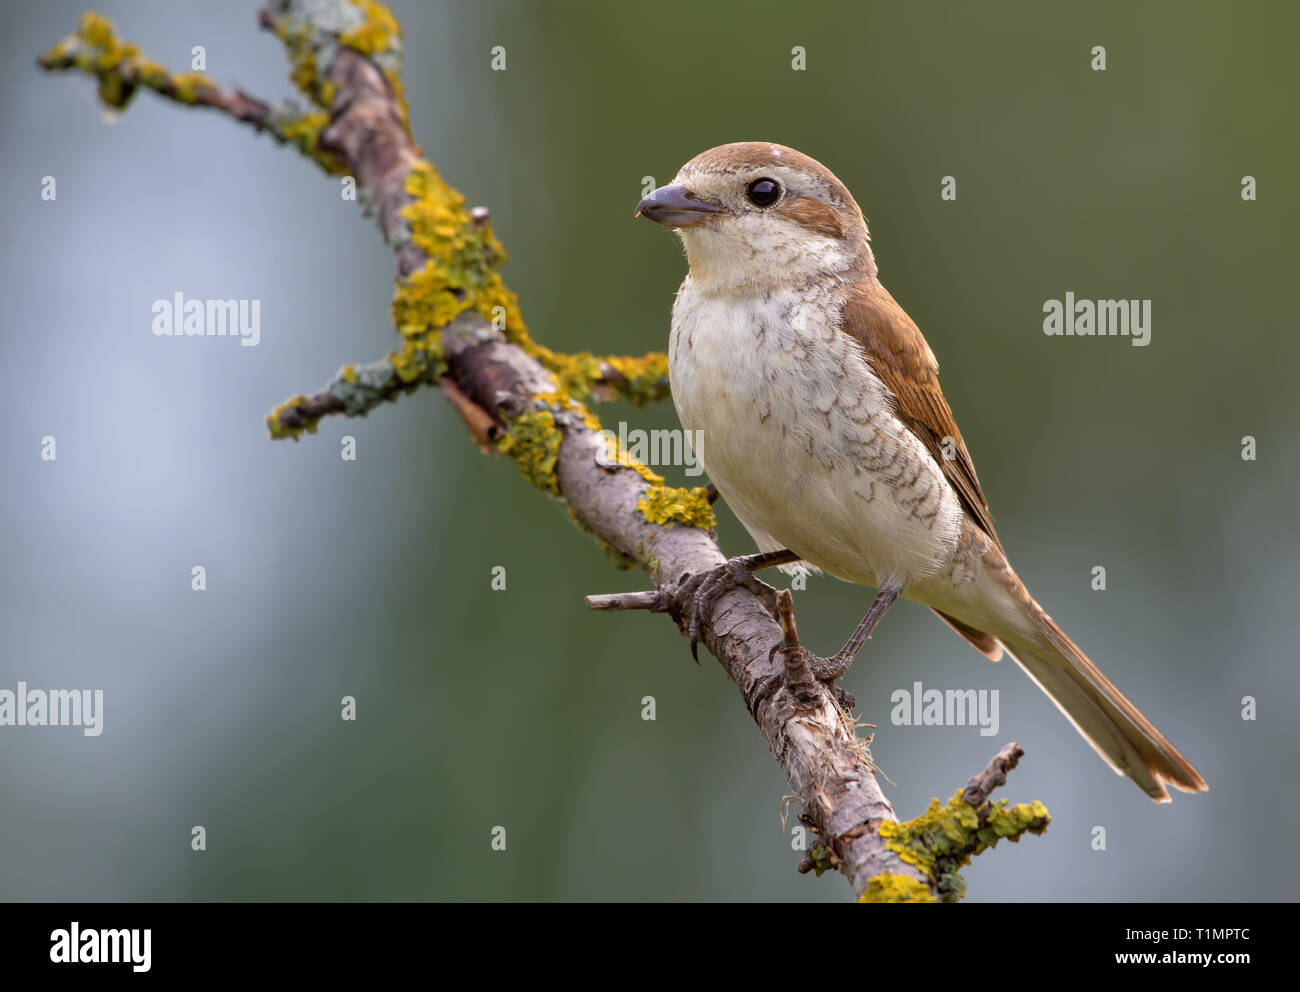 Red-backed shrike posing on a lichen branch Stock Photo